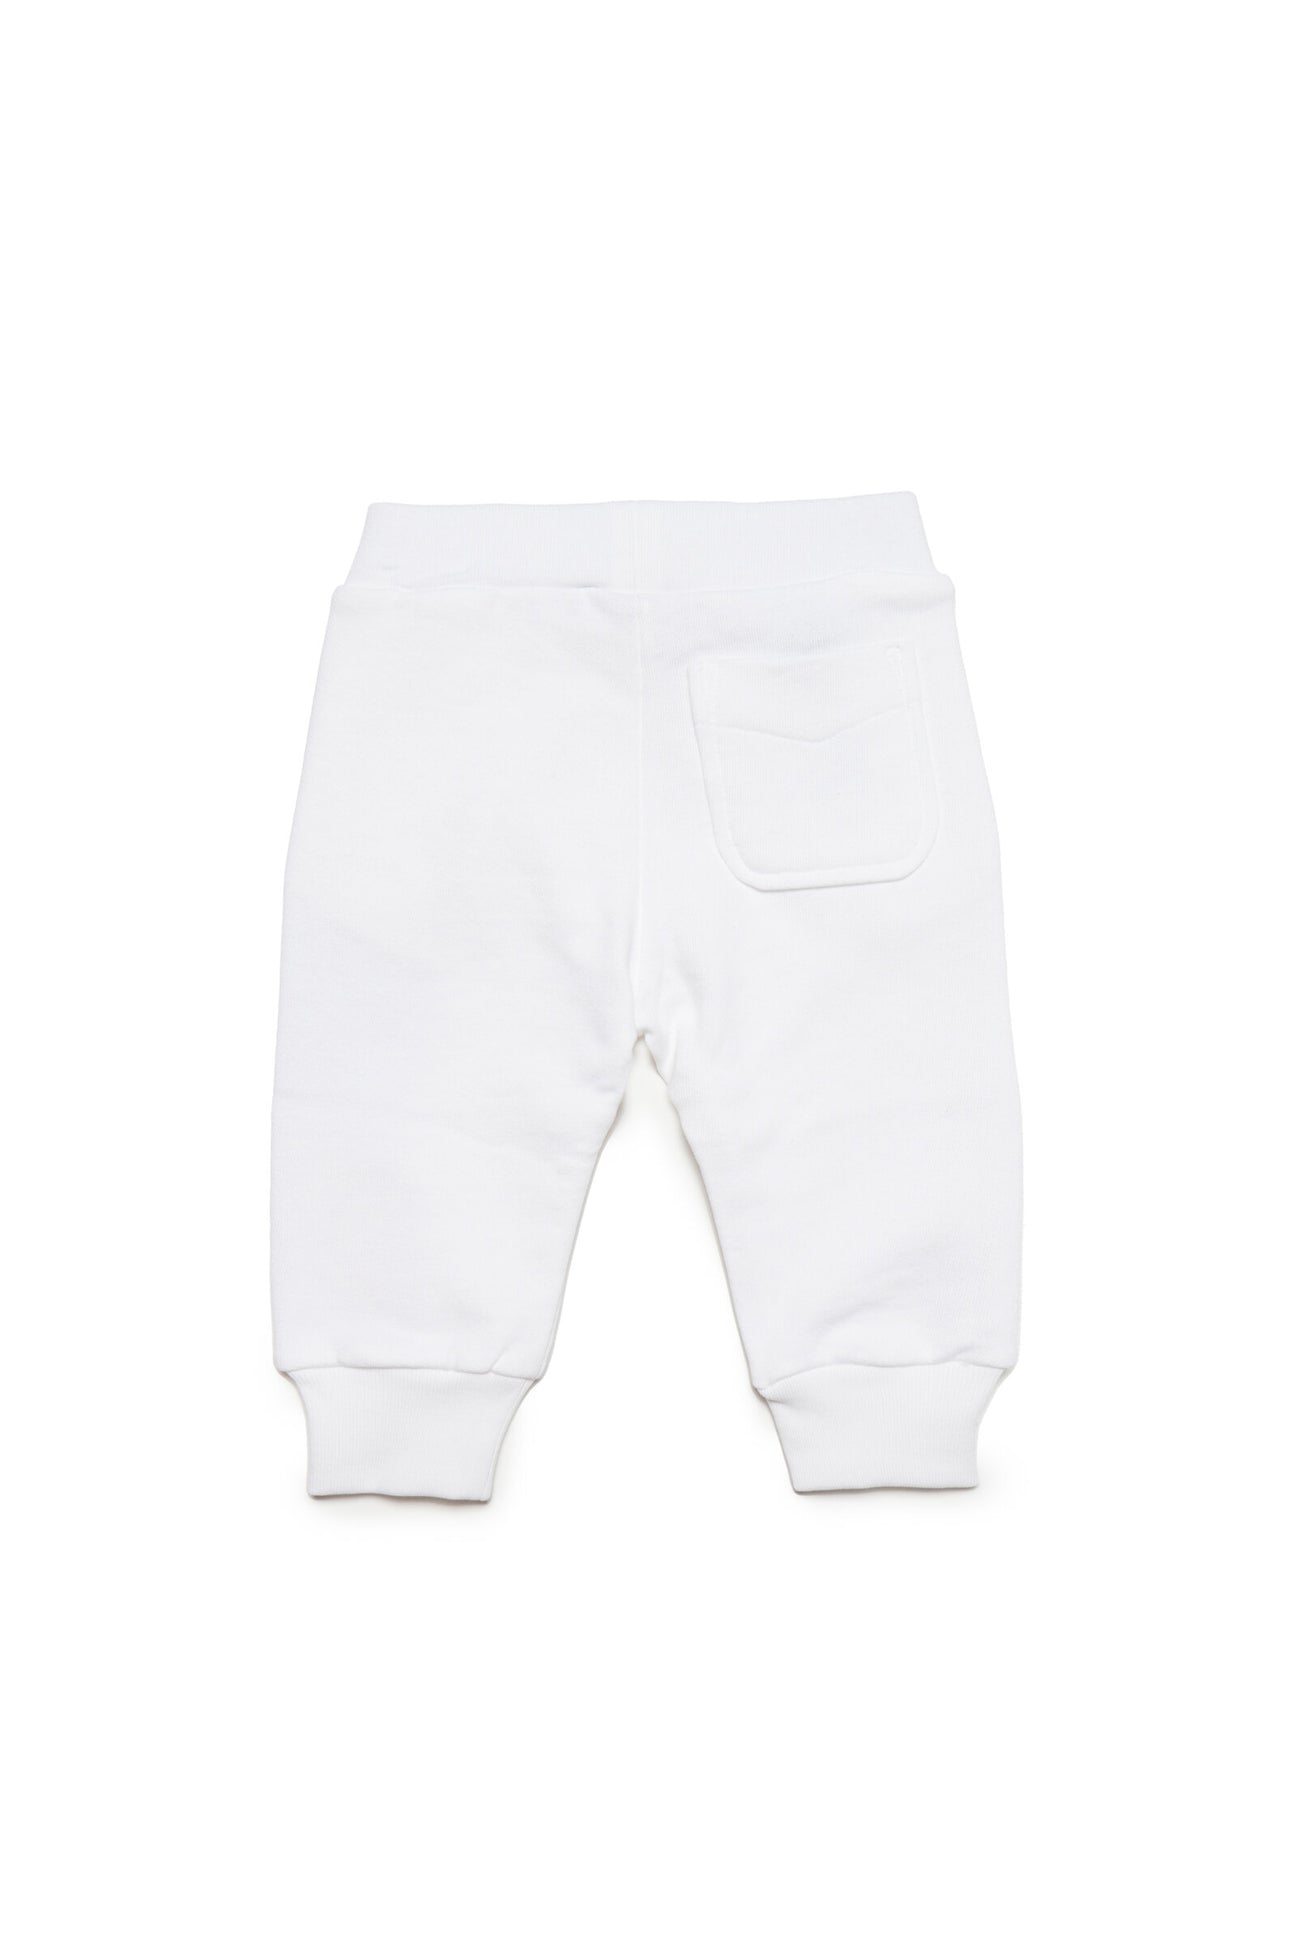 White jogger pants with Diesel double logo and back pocket White jogger pants with Diesel double logo and back pocket